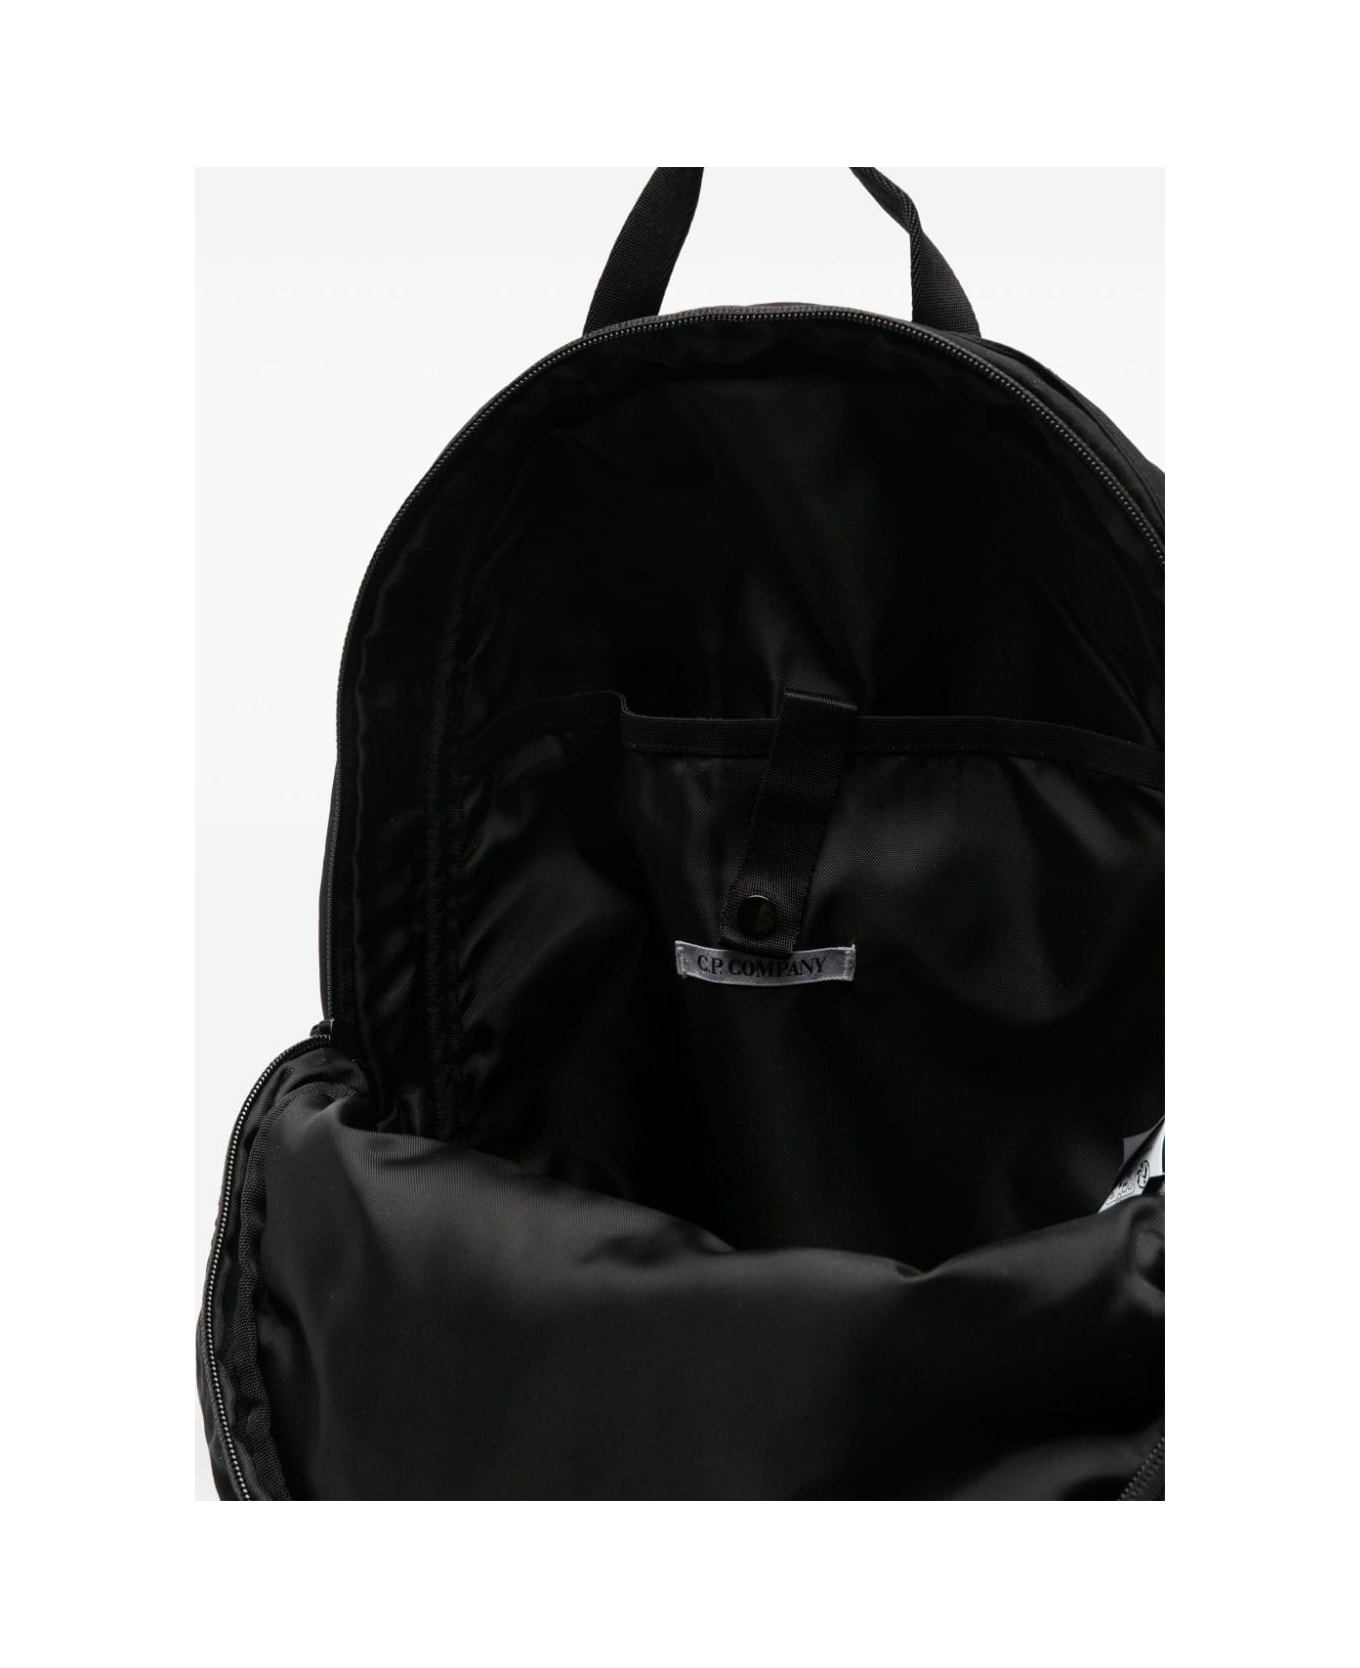 C.P. Company Undersixteen Laptop Backpack With Application - Black アクセサリー＆ギフト